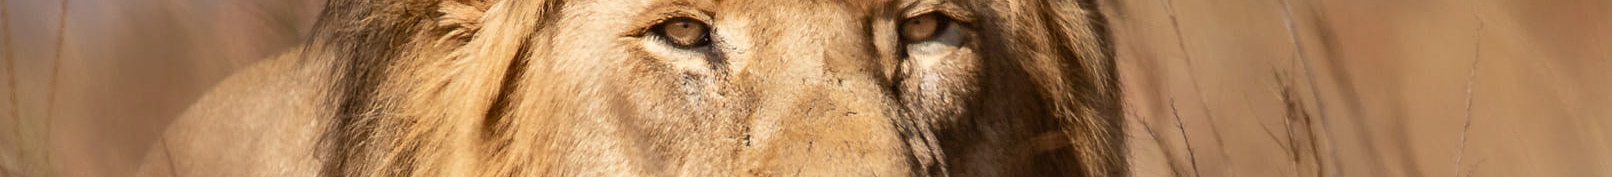 Wild and Free Foundation's profile banner